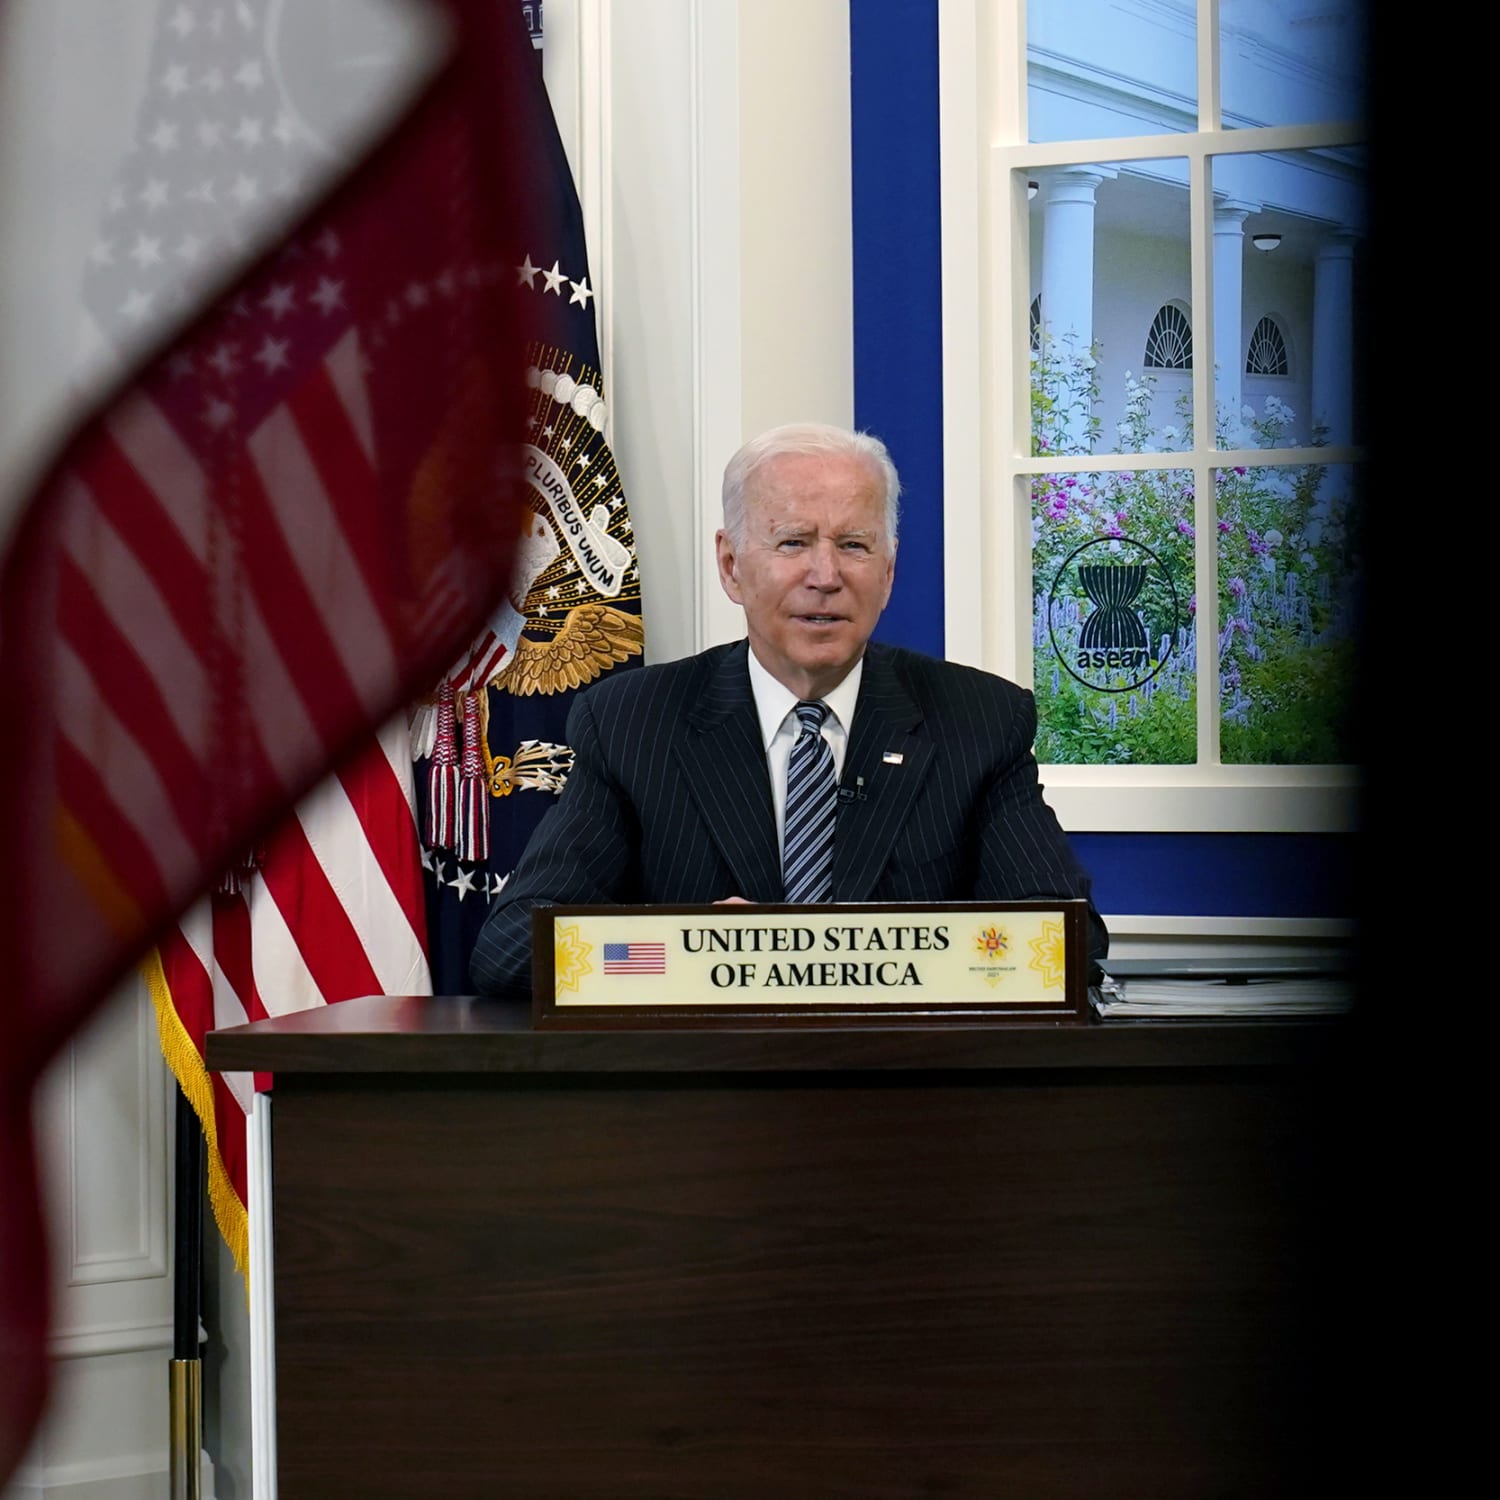 Biden makes calls to House Democrats to gather votes for $1.75T social safety net bill